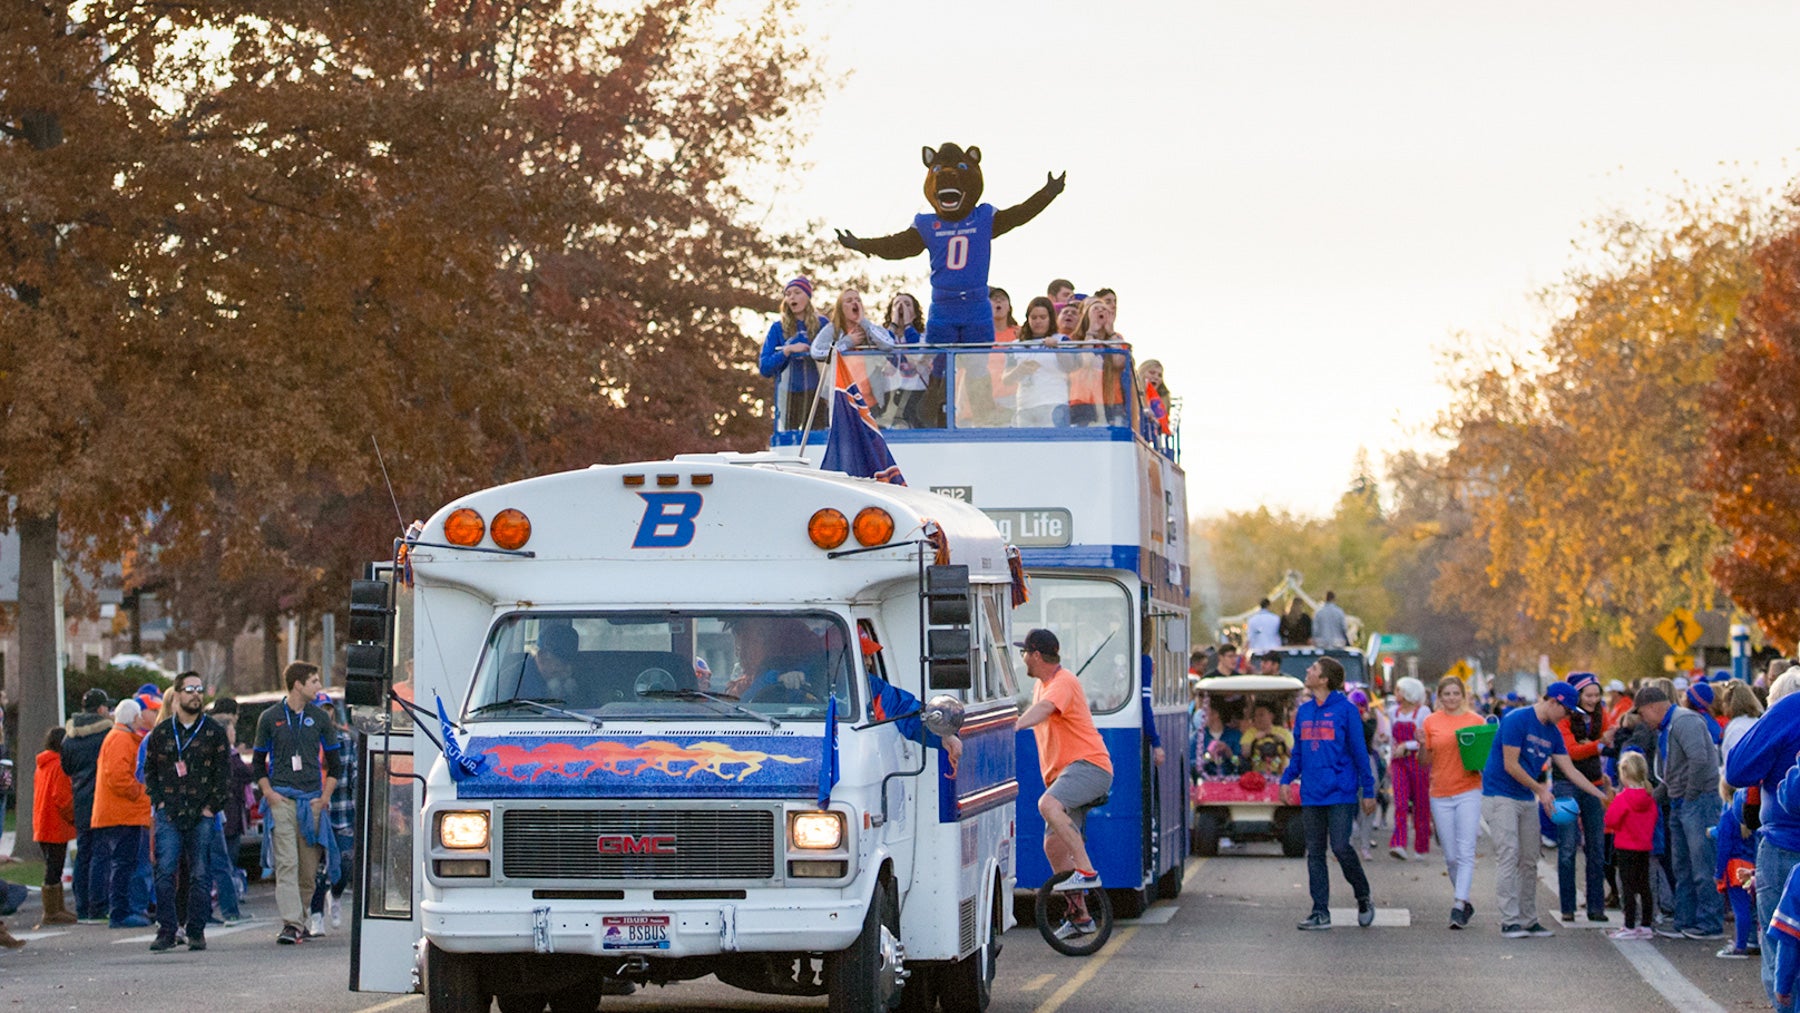 Homecoming photo with a Bronco Shuttle in front, a tour bus behind it with Buster Bronco, and a crowd of people behind that